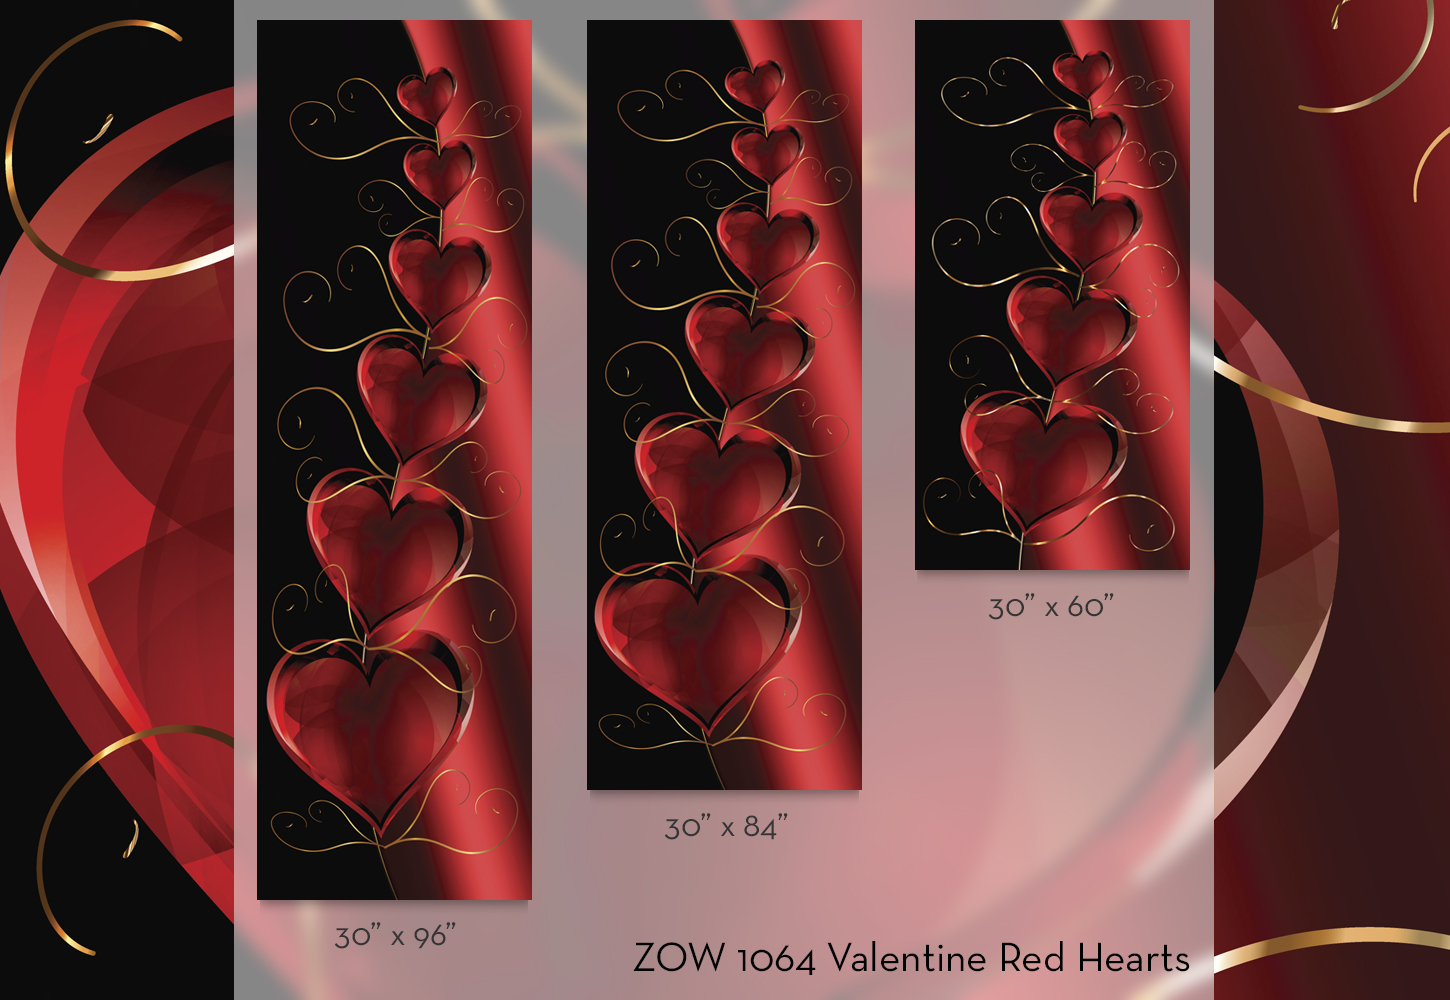 ZOW 1064 Valentine Red Hearts